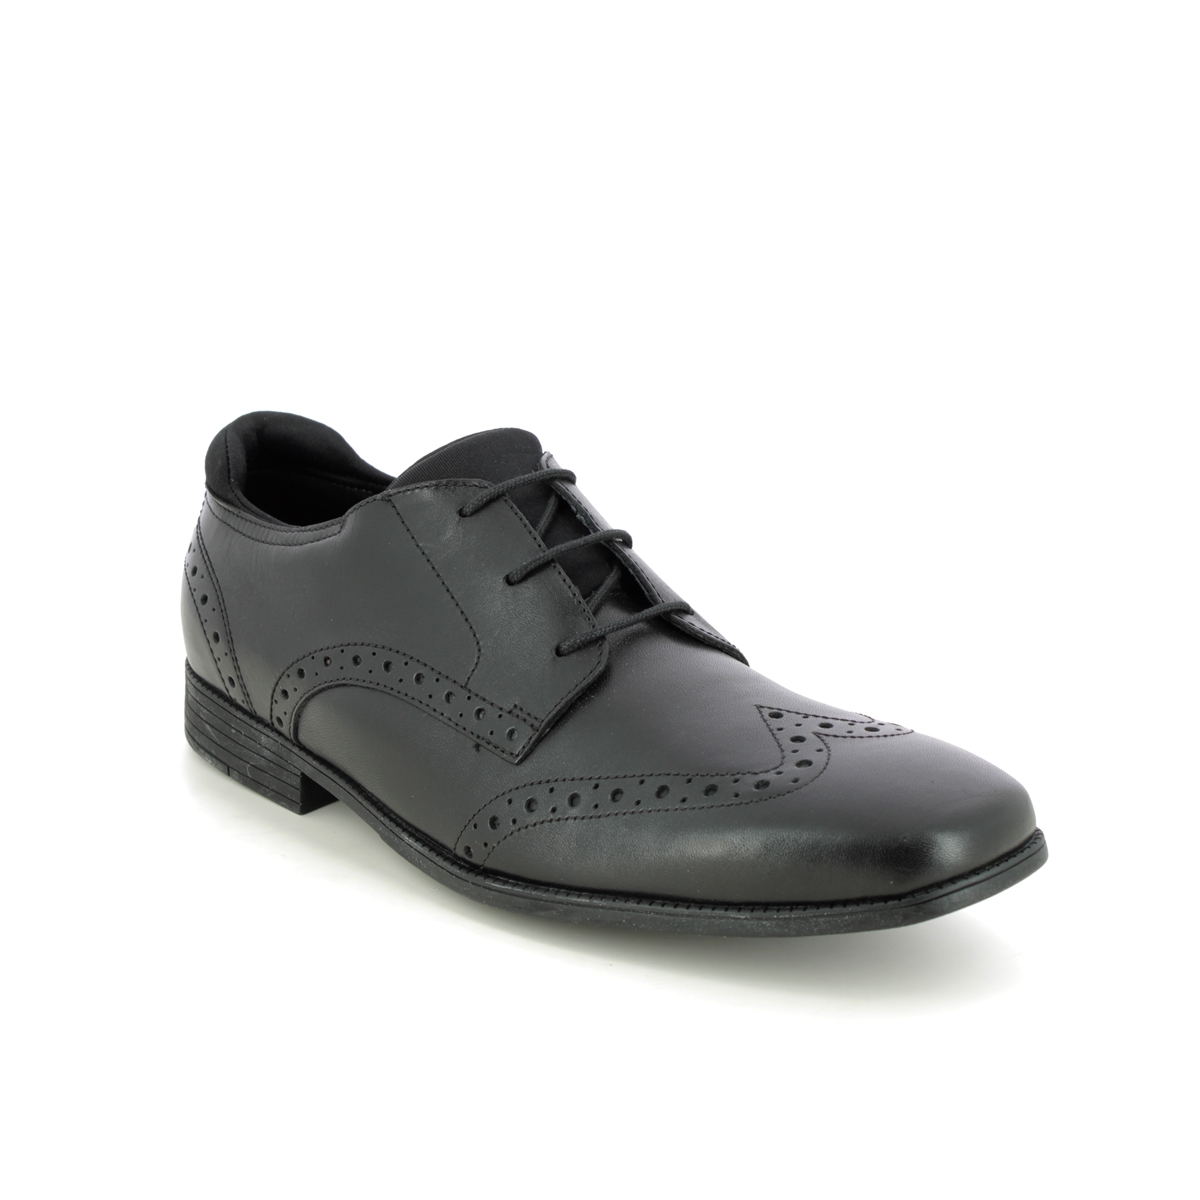 Start Rite - Tailor In Black Leather 3513-76F In Size 7 In Plain Black Leather For School Boys Shoes  In Black Leather For kids